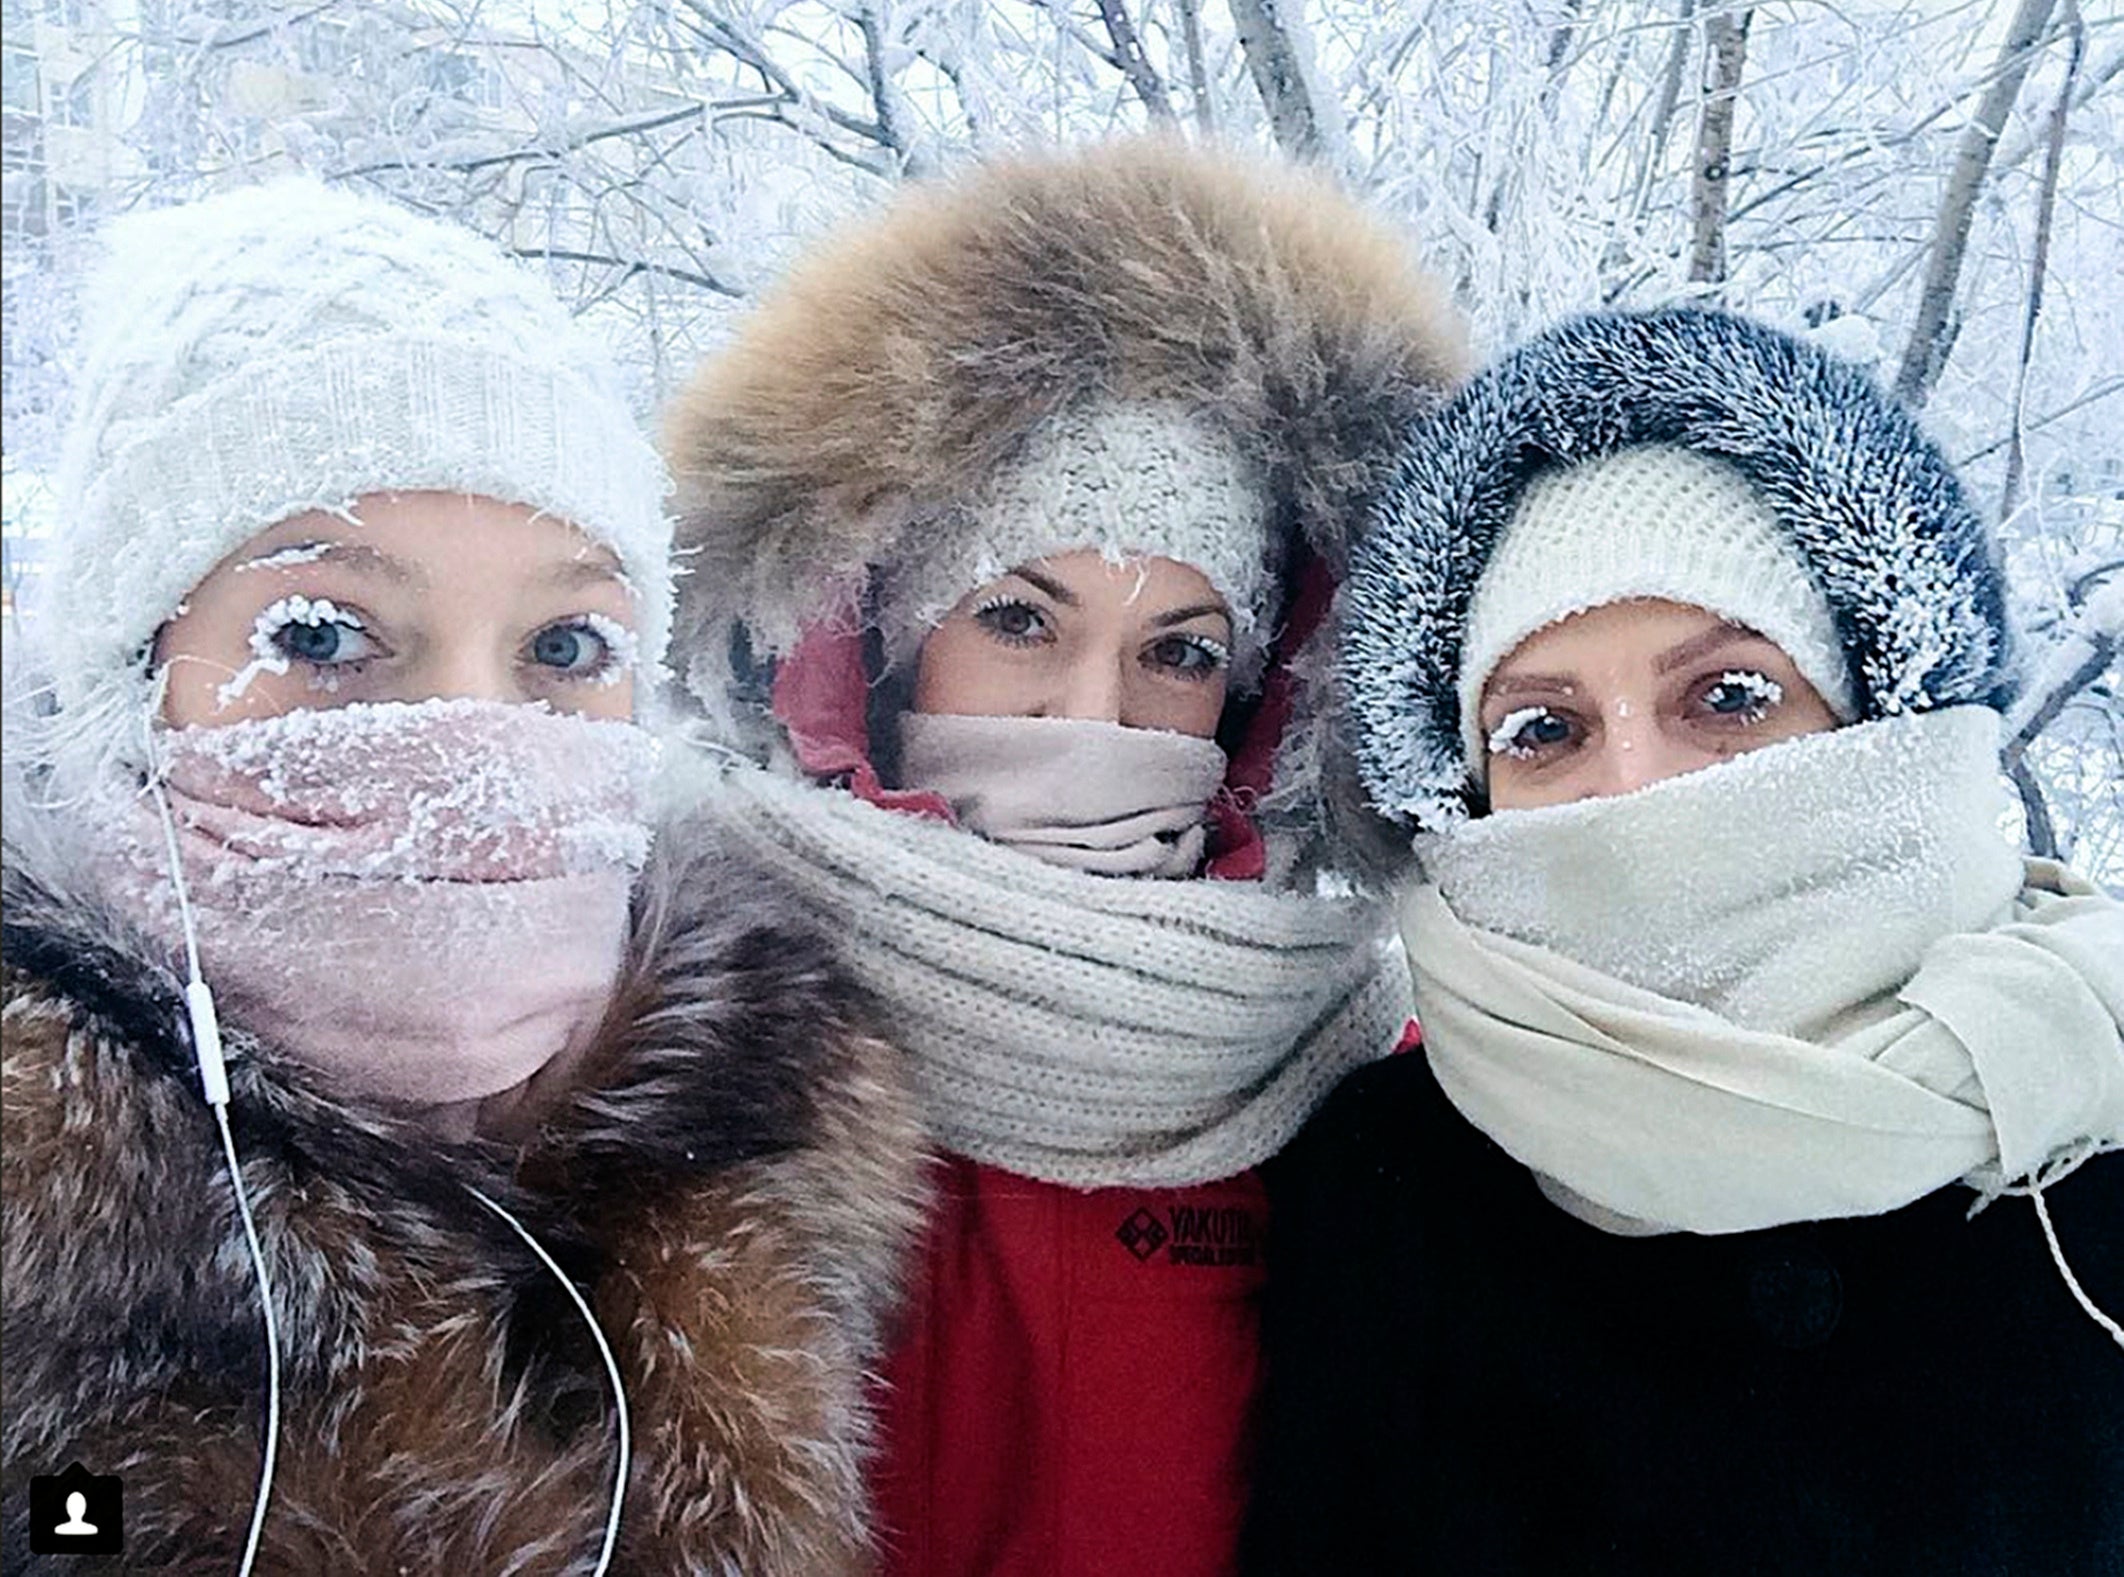 Anastasia Gruzdeva, left, poses for selfie with her friends as the temperature dropped below -50 degrees in Yakutsk, Russia